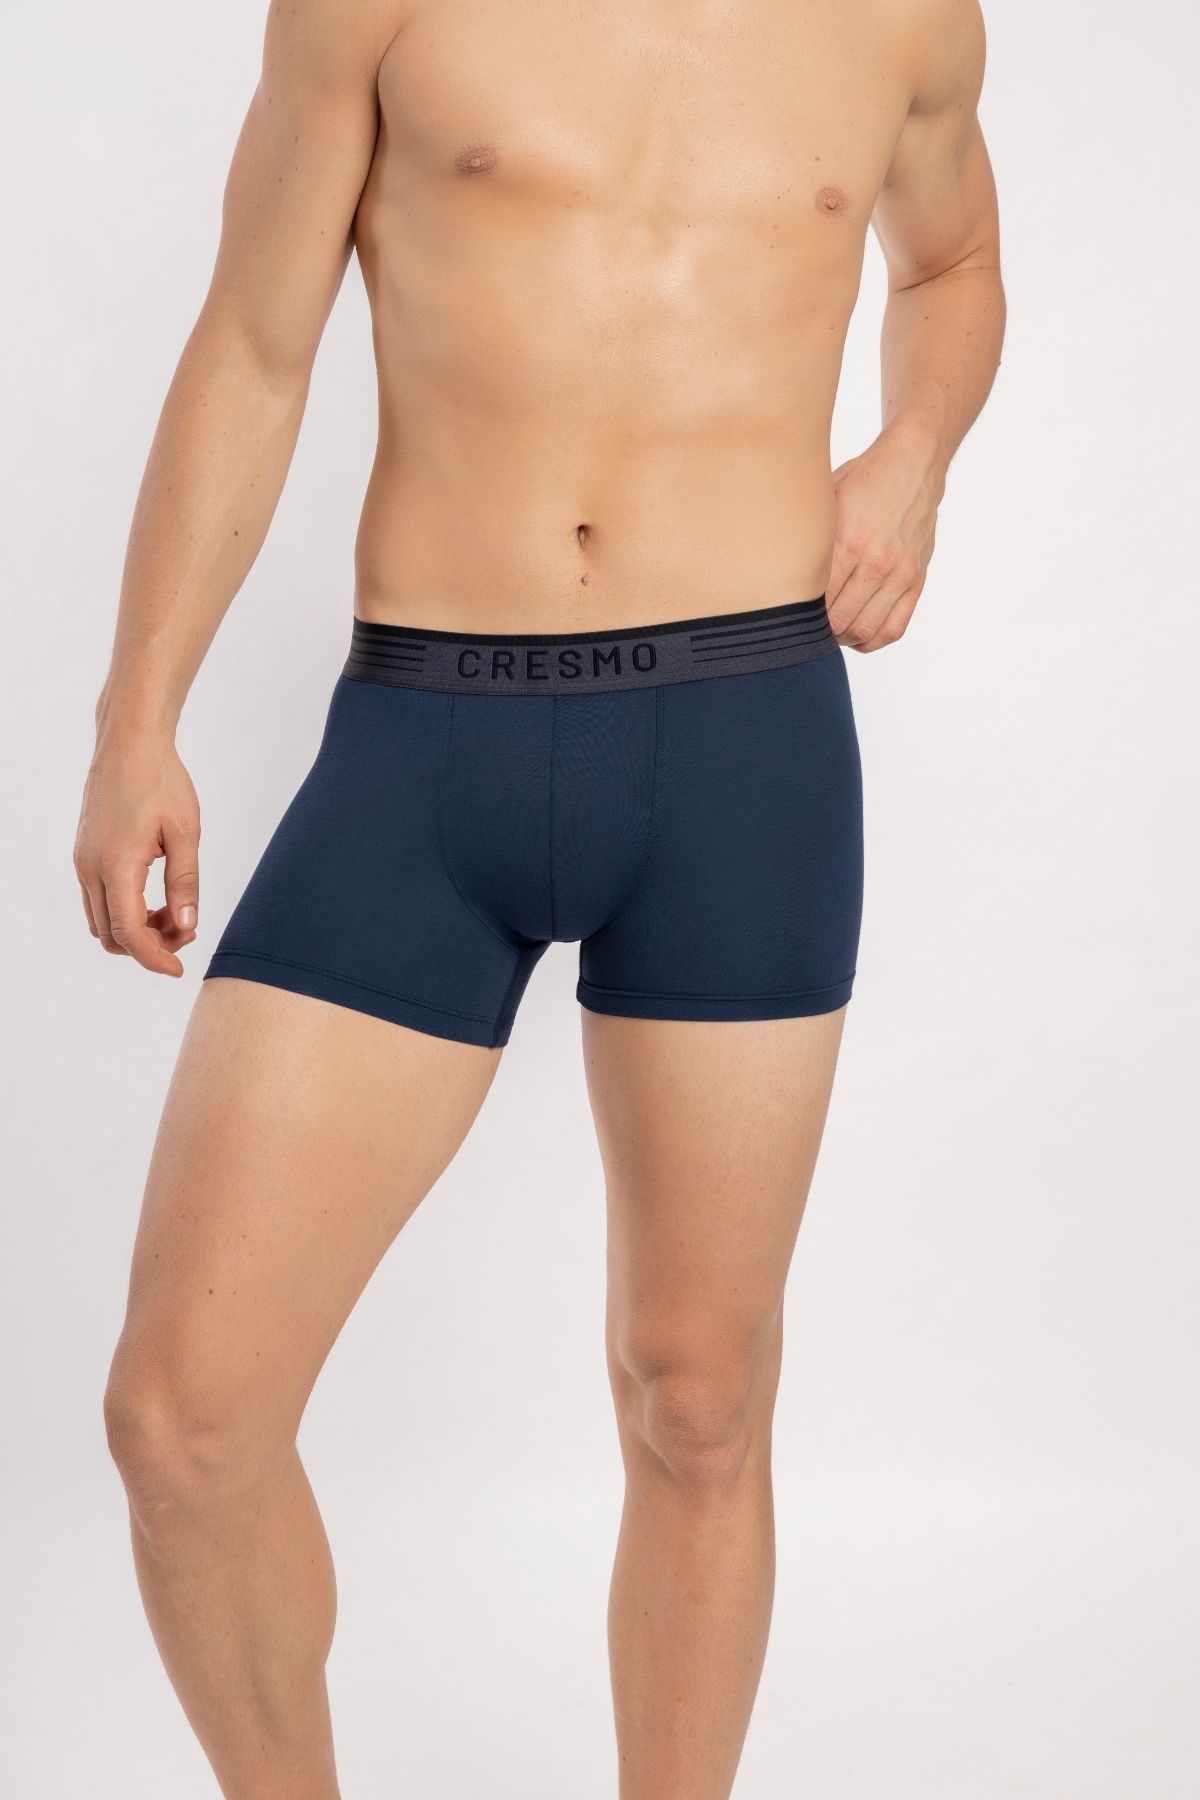 CRESMO | CRESMO Men's Anti-Microbial Micro Modal Underwear Breathable Ultra Soft Trunk (Pack of 3) 3